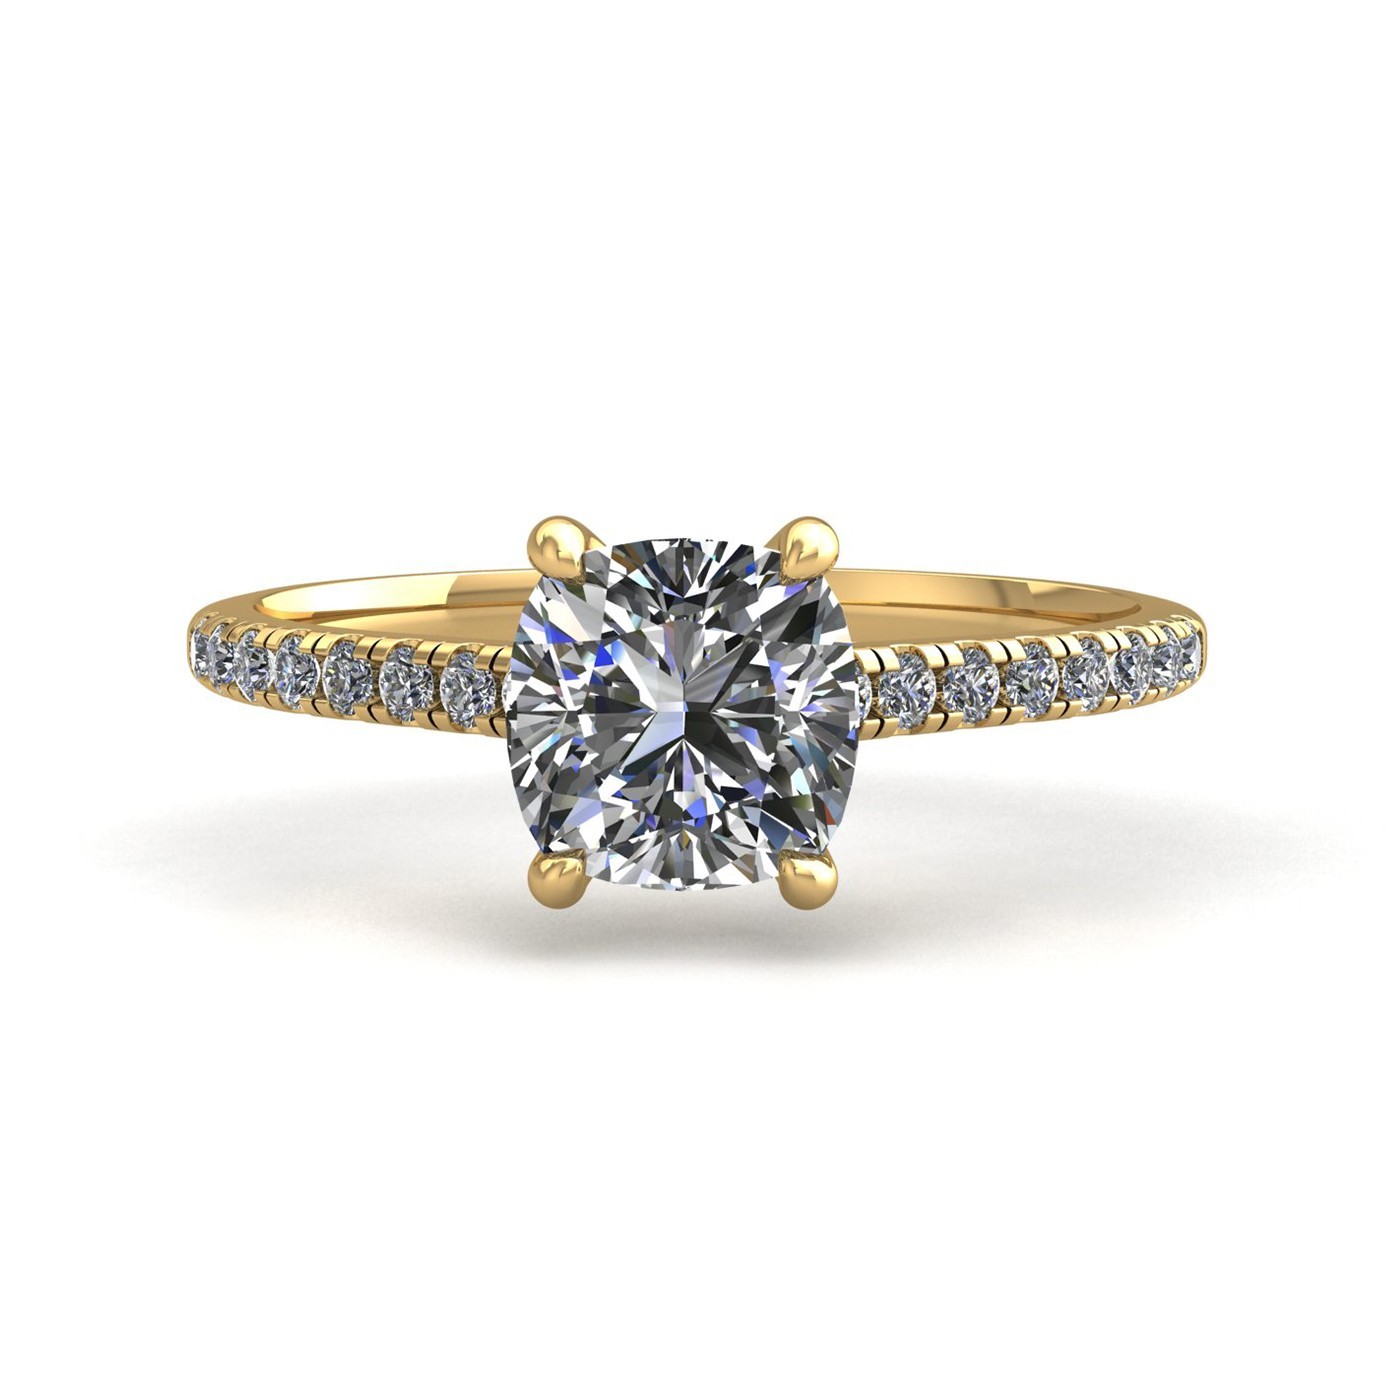 18k yellow gold 2.5ct 4 prongs cushion cut diamond engagement ring with whisper thin pavÉ set band Photos & images